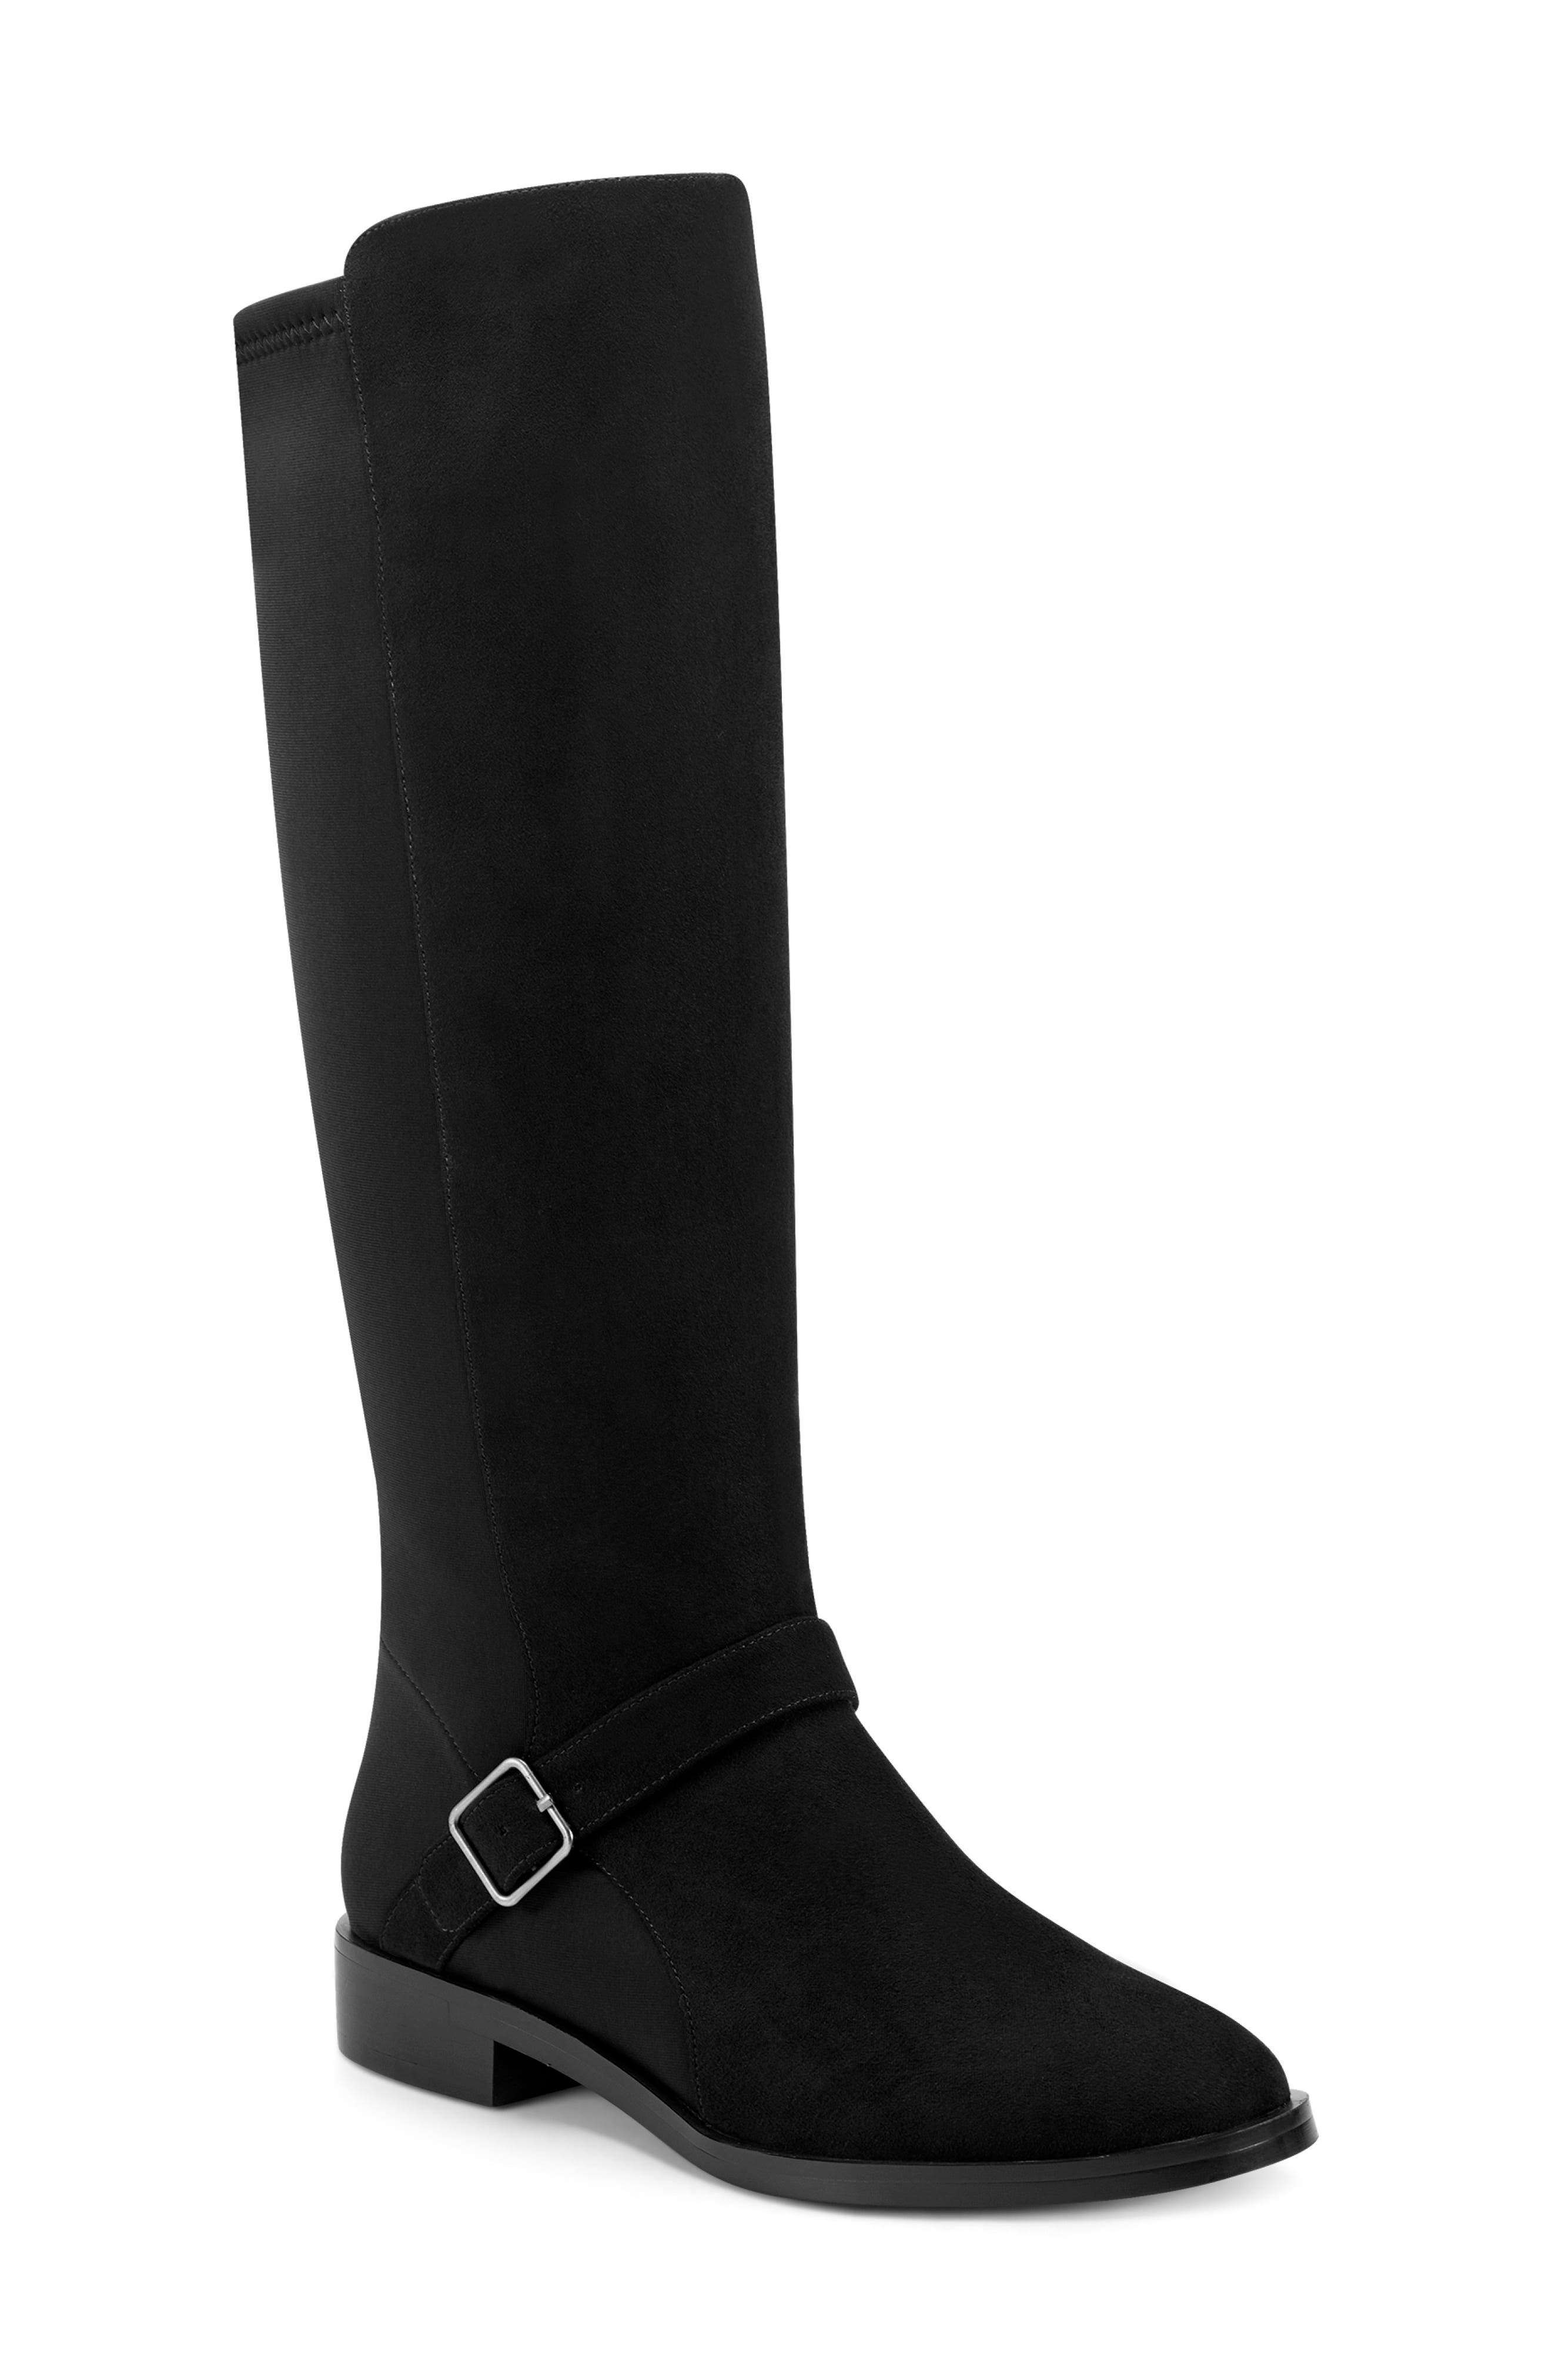 nordstrom womens riding boots